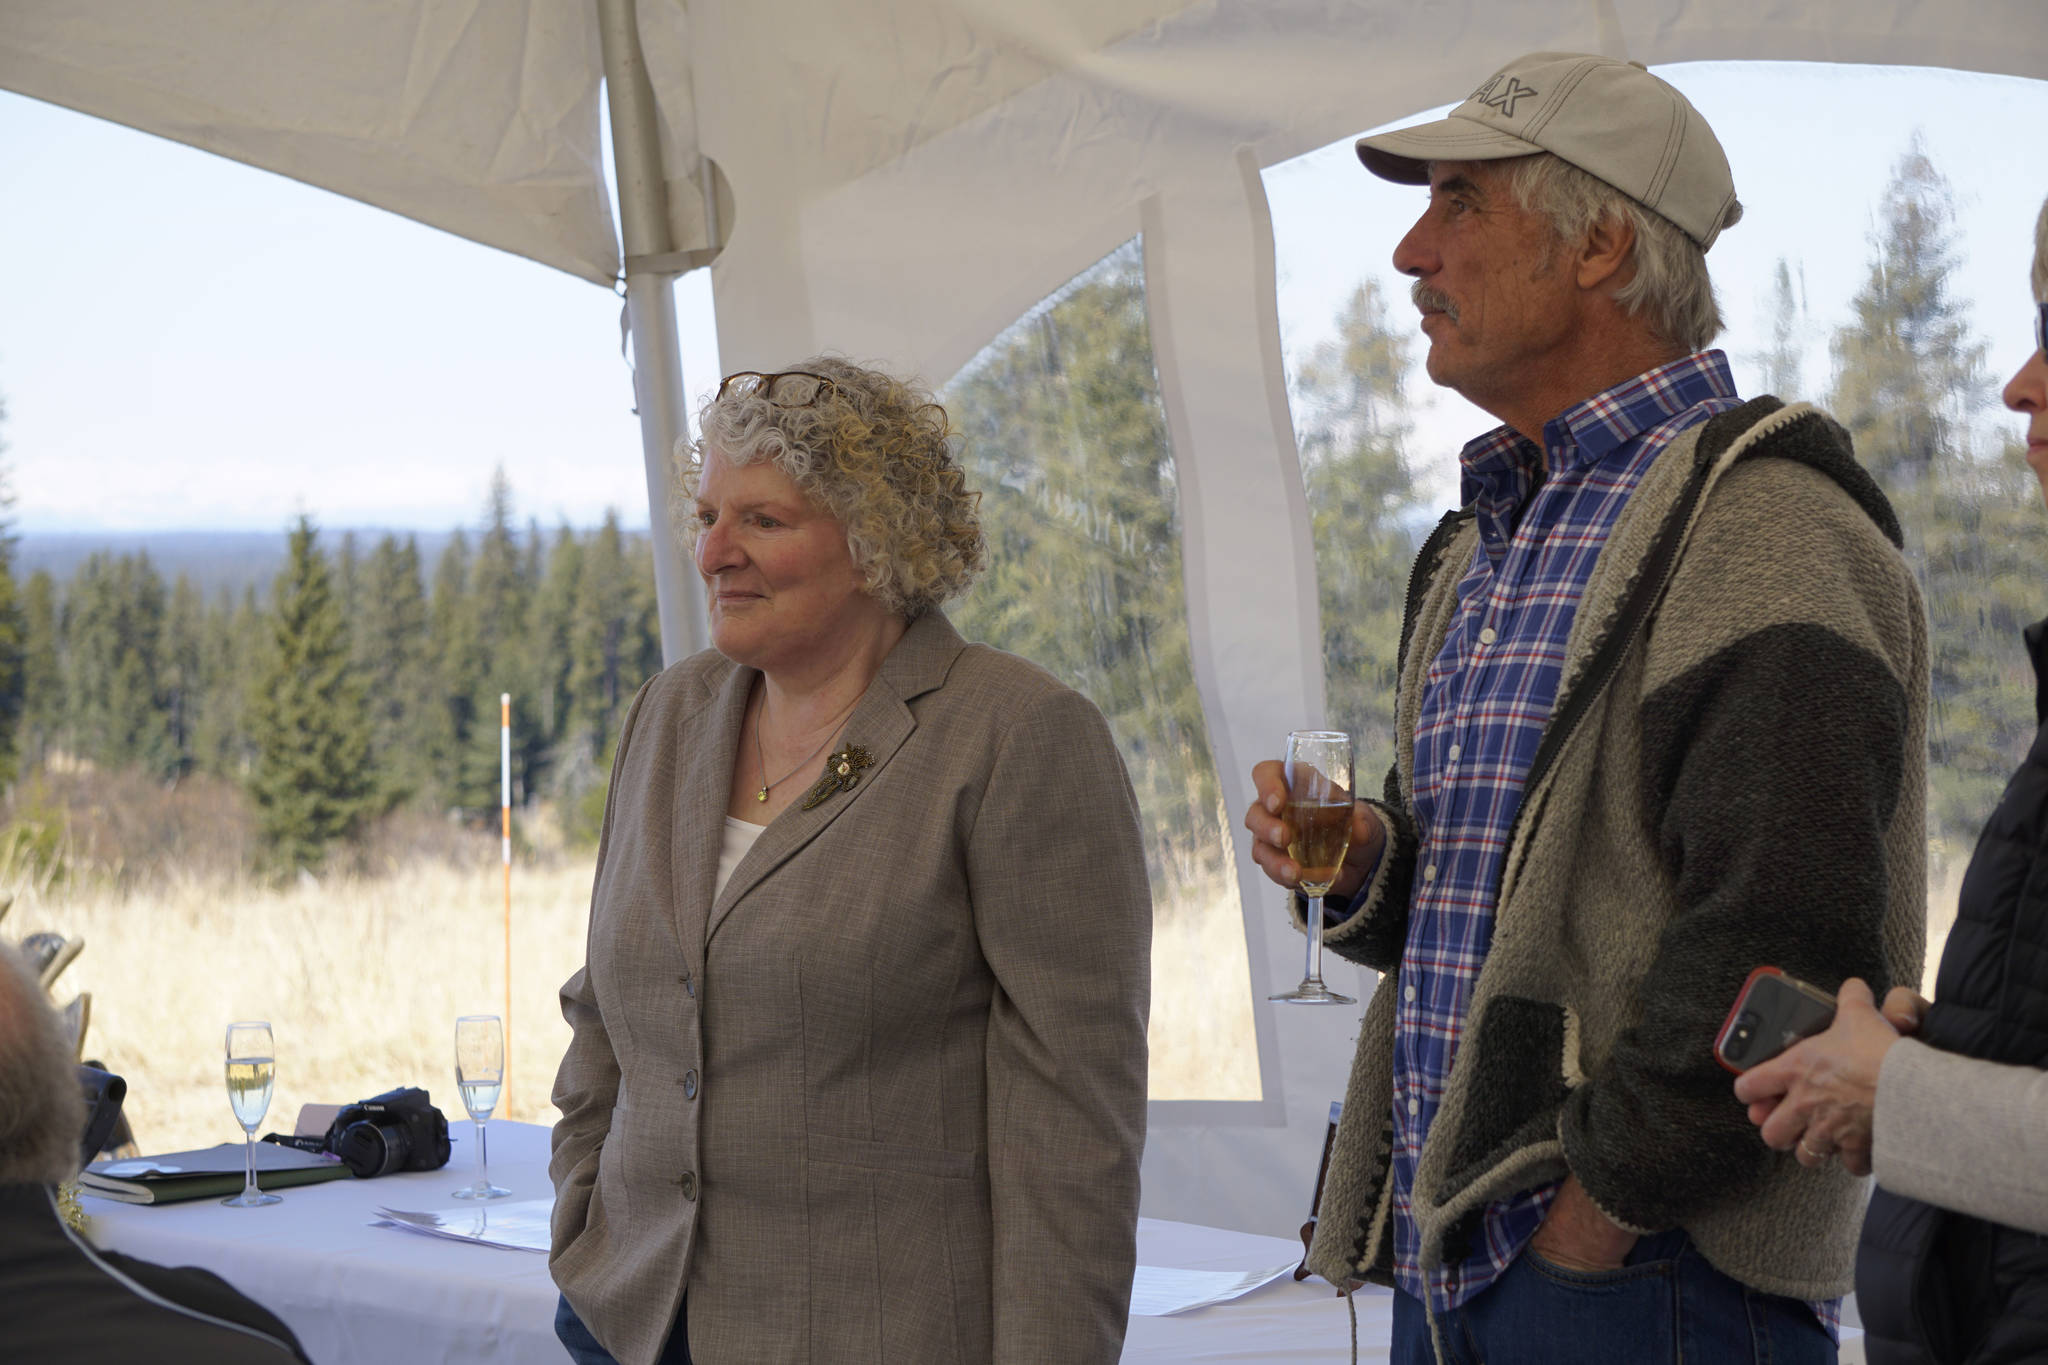 Homer writer and Storyknife Writers Retreat founder Dana Stabenow stands with contractor Scott Bauer at groundbreaking ceremonies last Saturday, May 4, 2019, at the retreat property in Homer, Alaska. Construction started this month on the main house and cabins that will in a year house visiting women writers. (Photo by Michael Armstrong/Homer News)